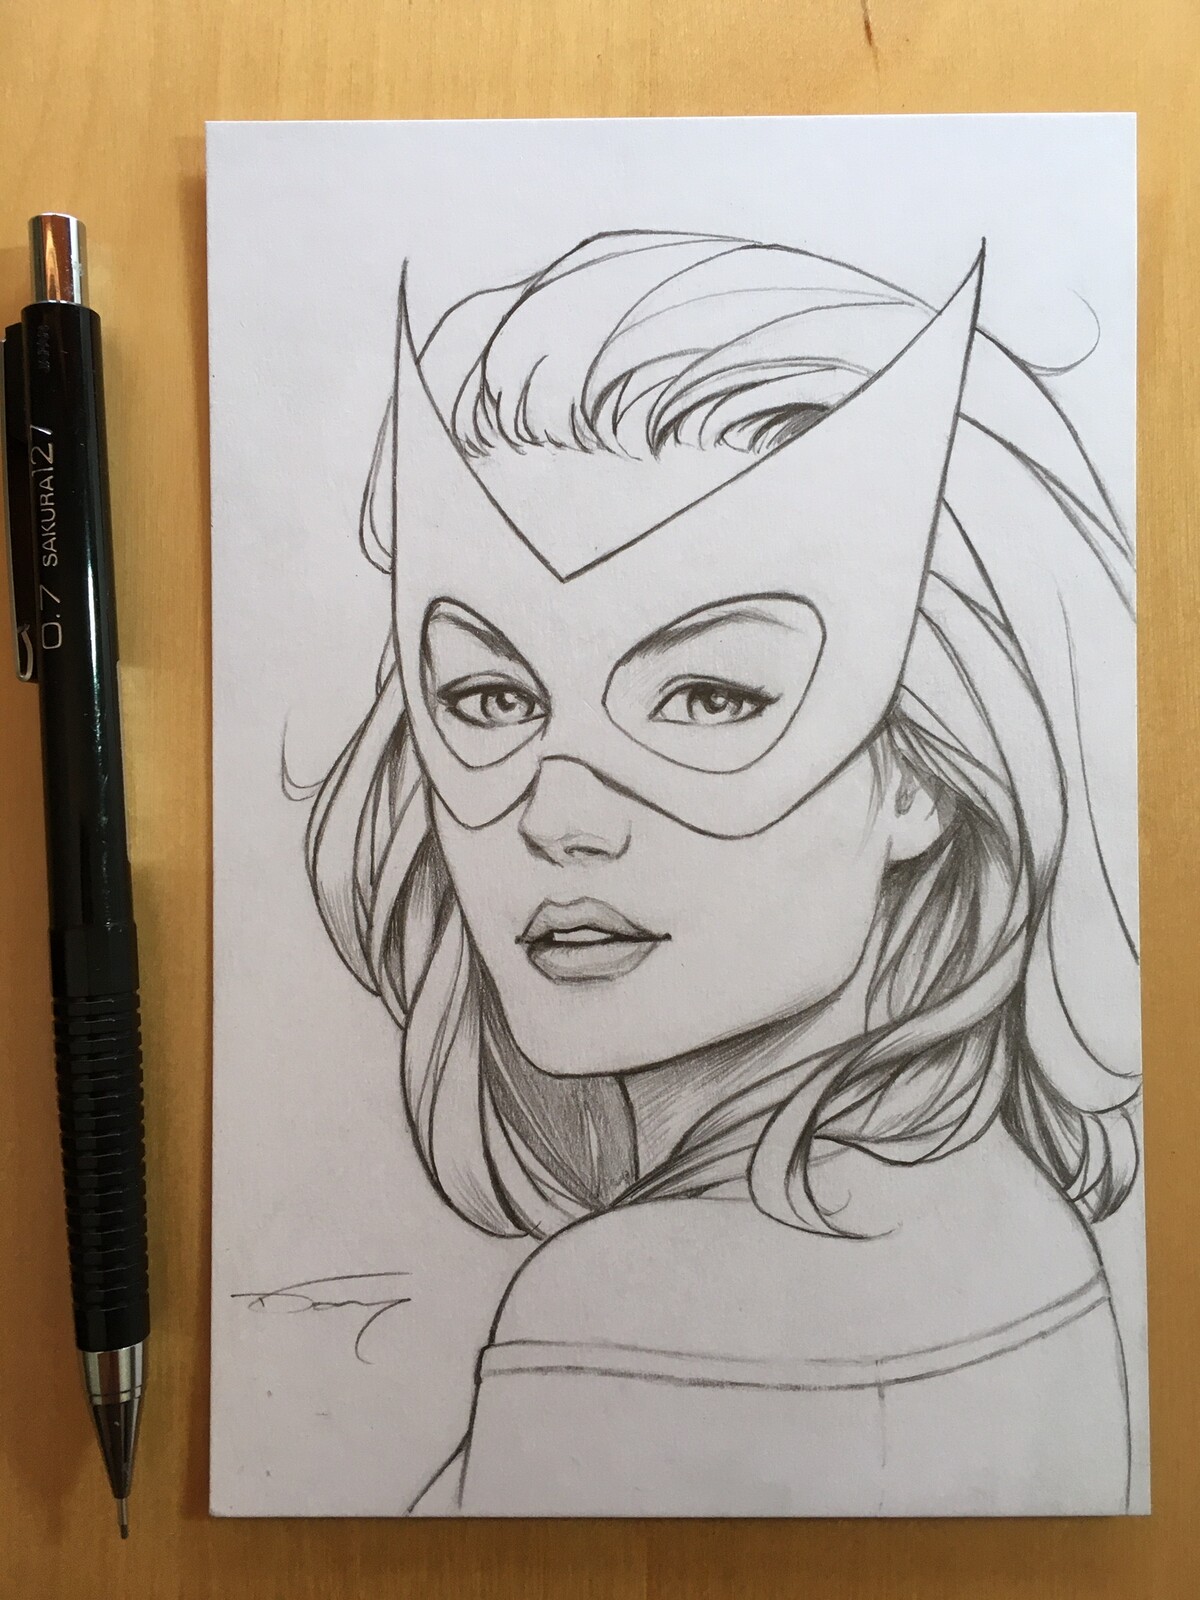 Marvel Girl from the X-Men.
Drawn in pencil on 100 lbs white card stock
4 x 6 inch

If you're interested in a commission like this one, please visit my shop for more details!
https://donnydtran.bigcartel.com/